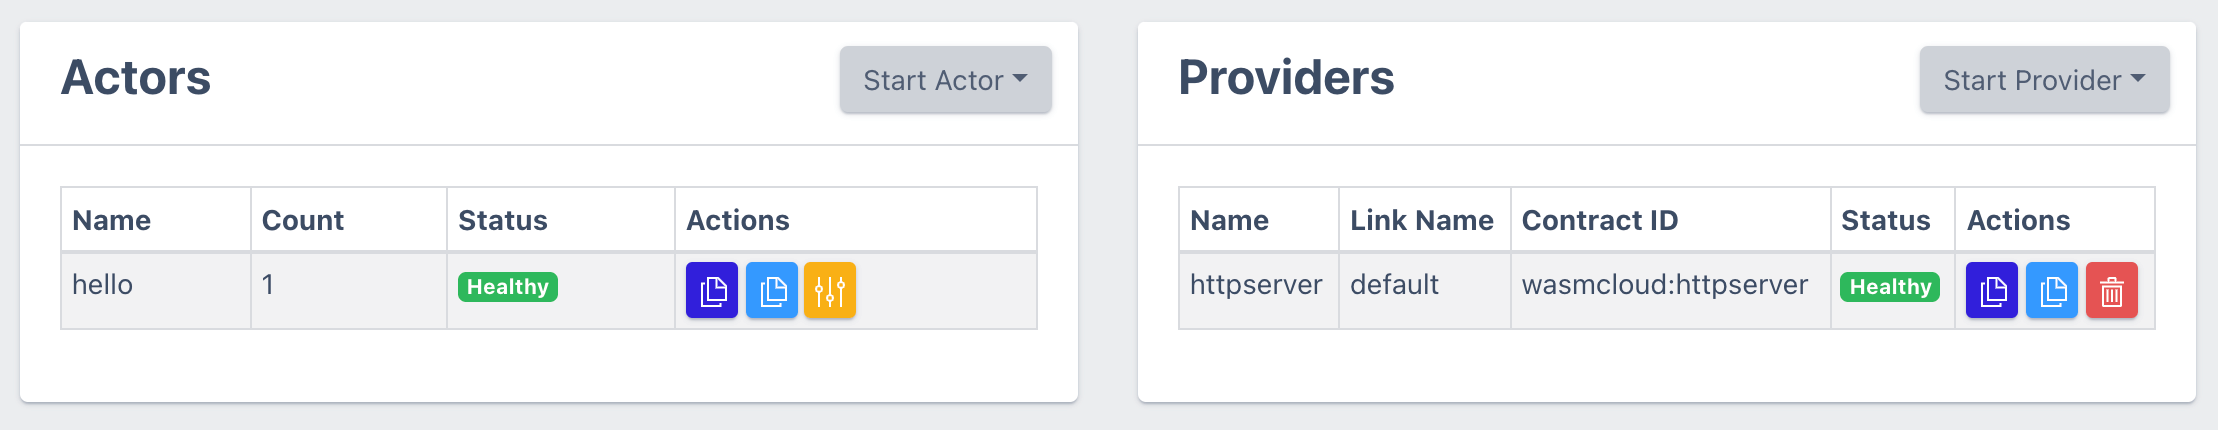 actor and provider